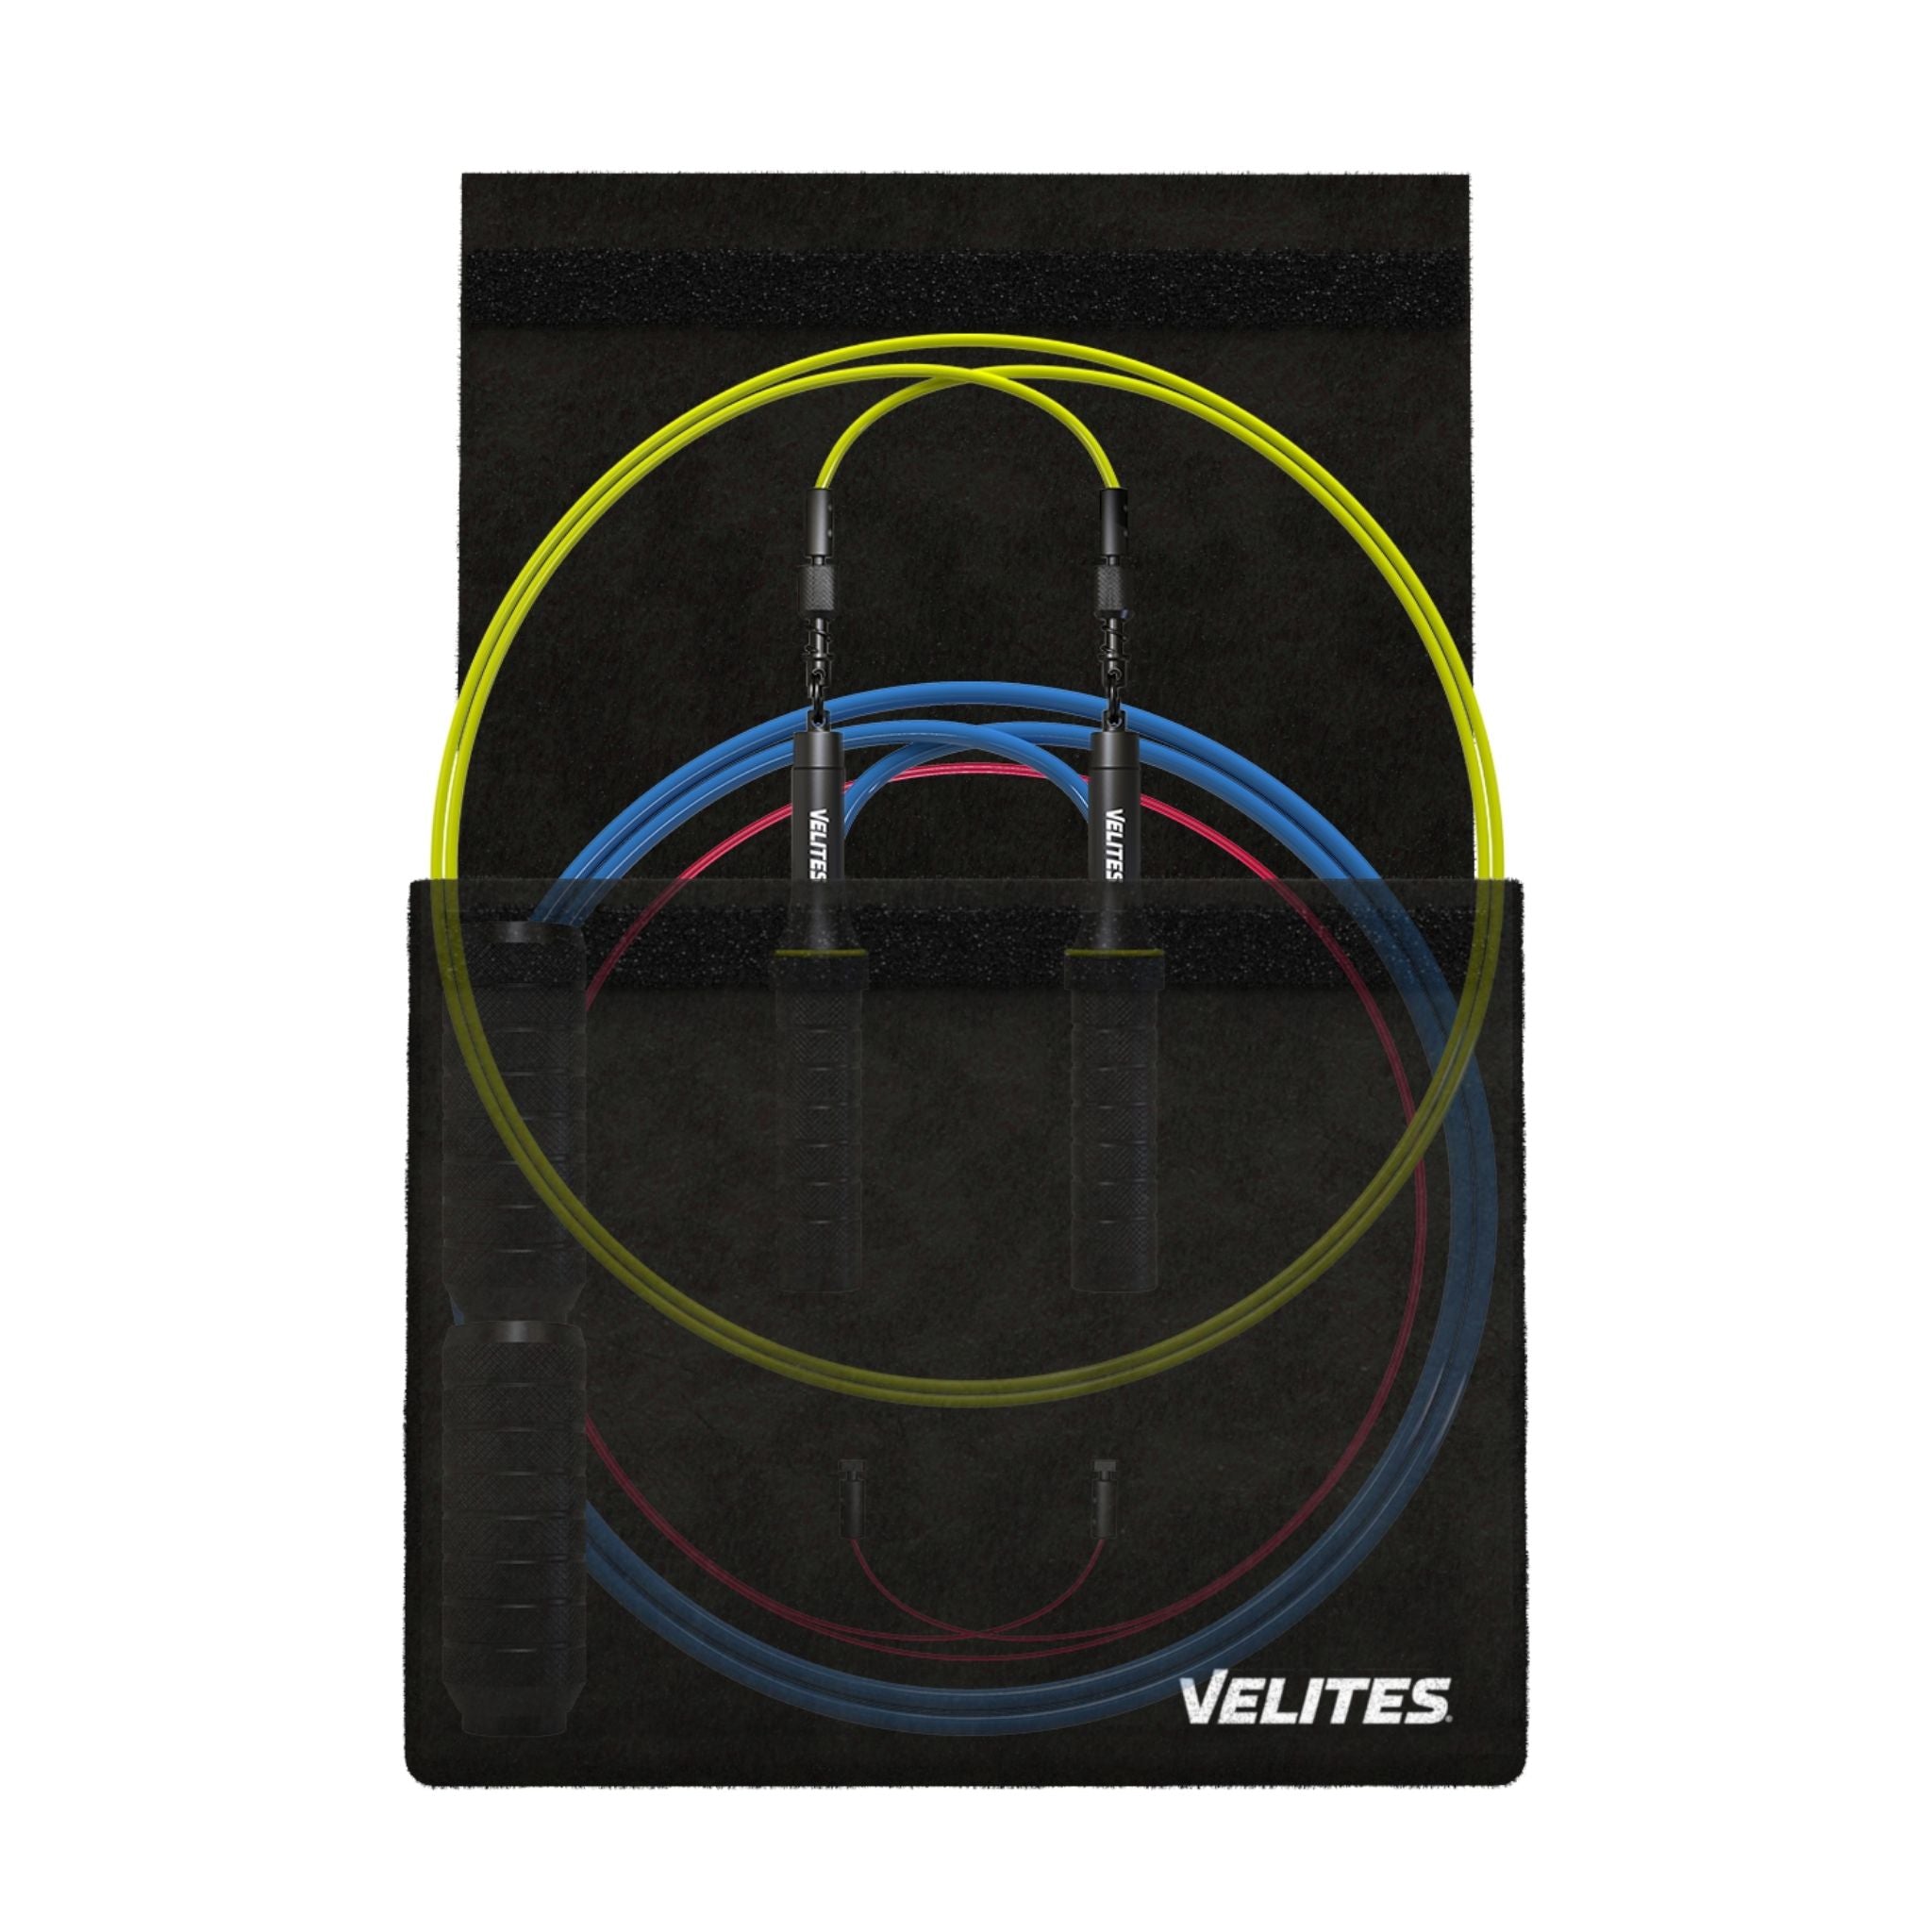 ✓Velites earth 2.0 Comba - Jump Rope - review- test 